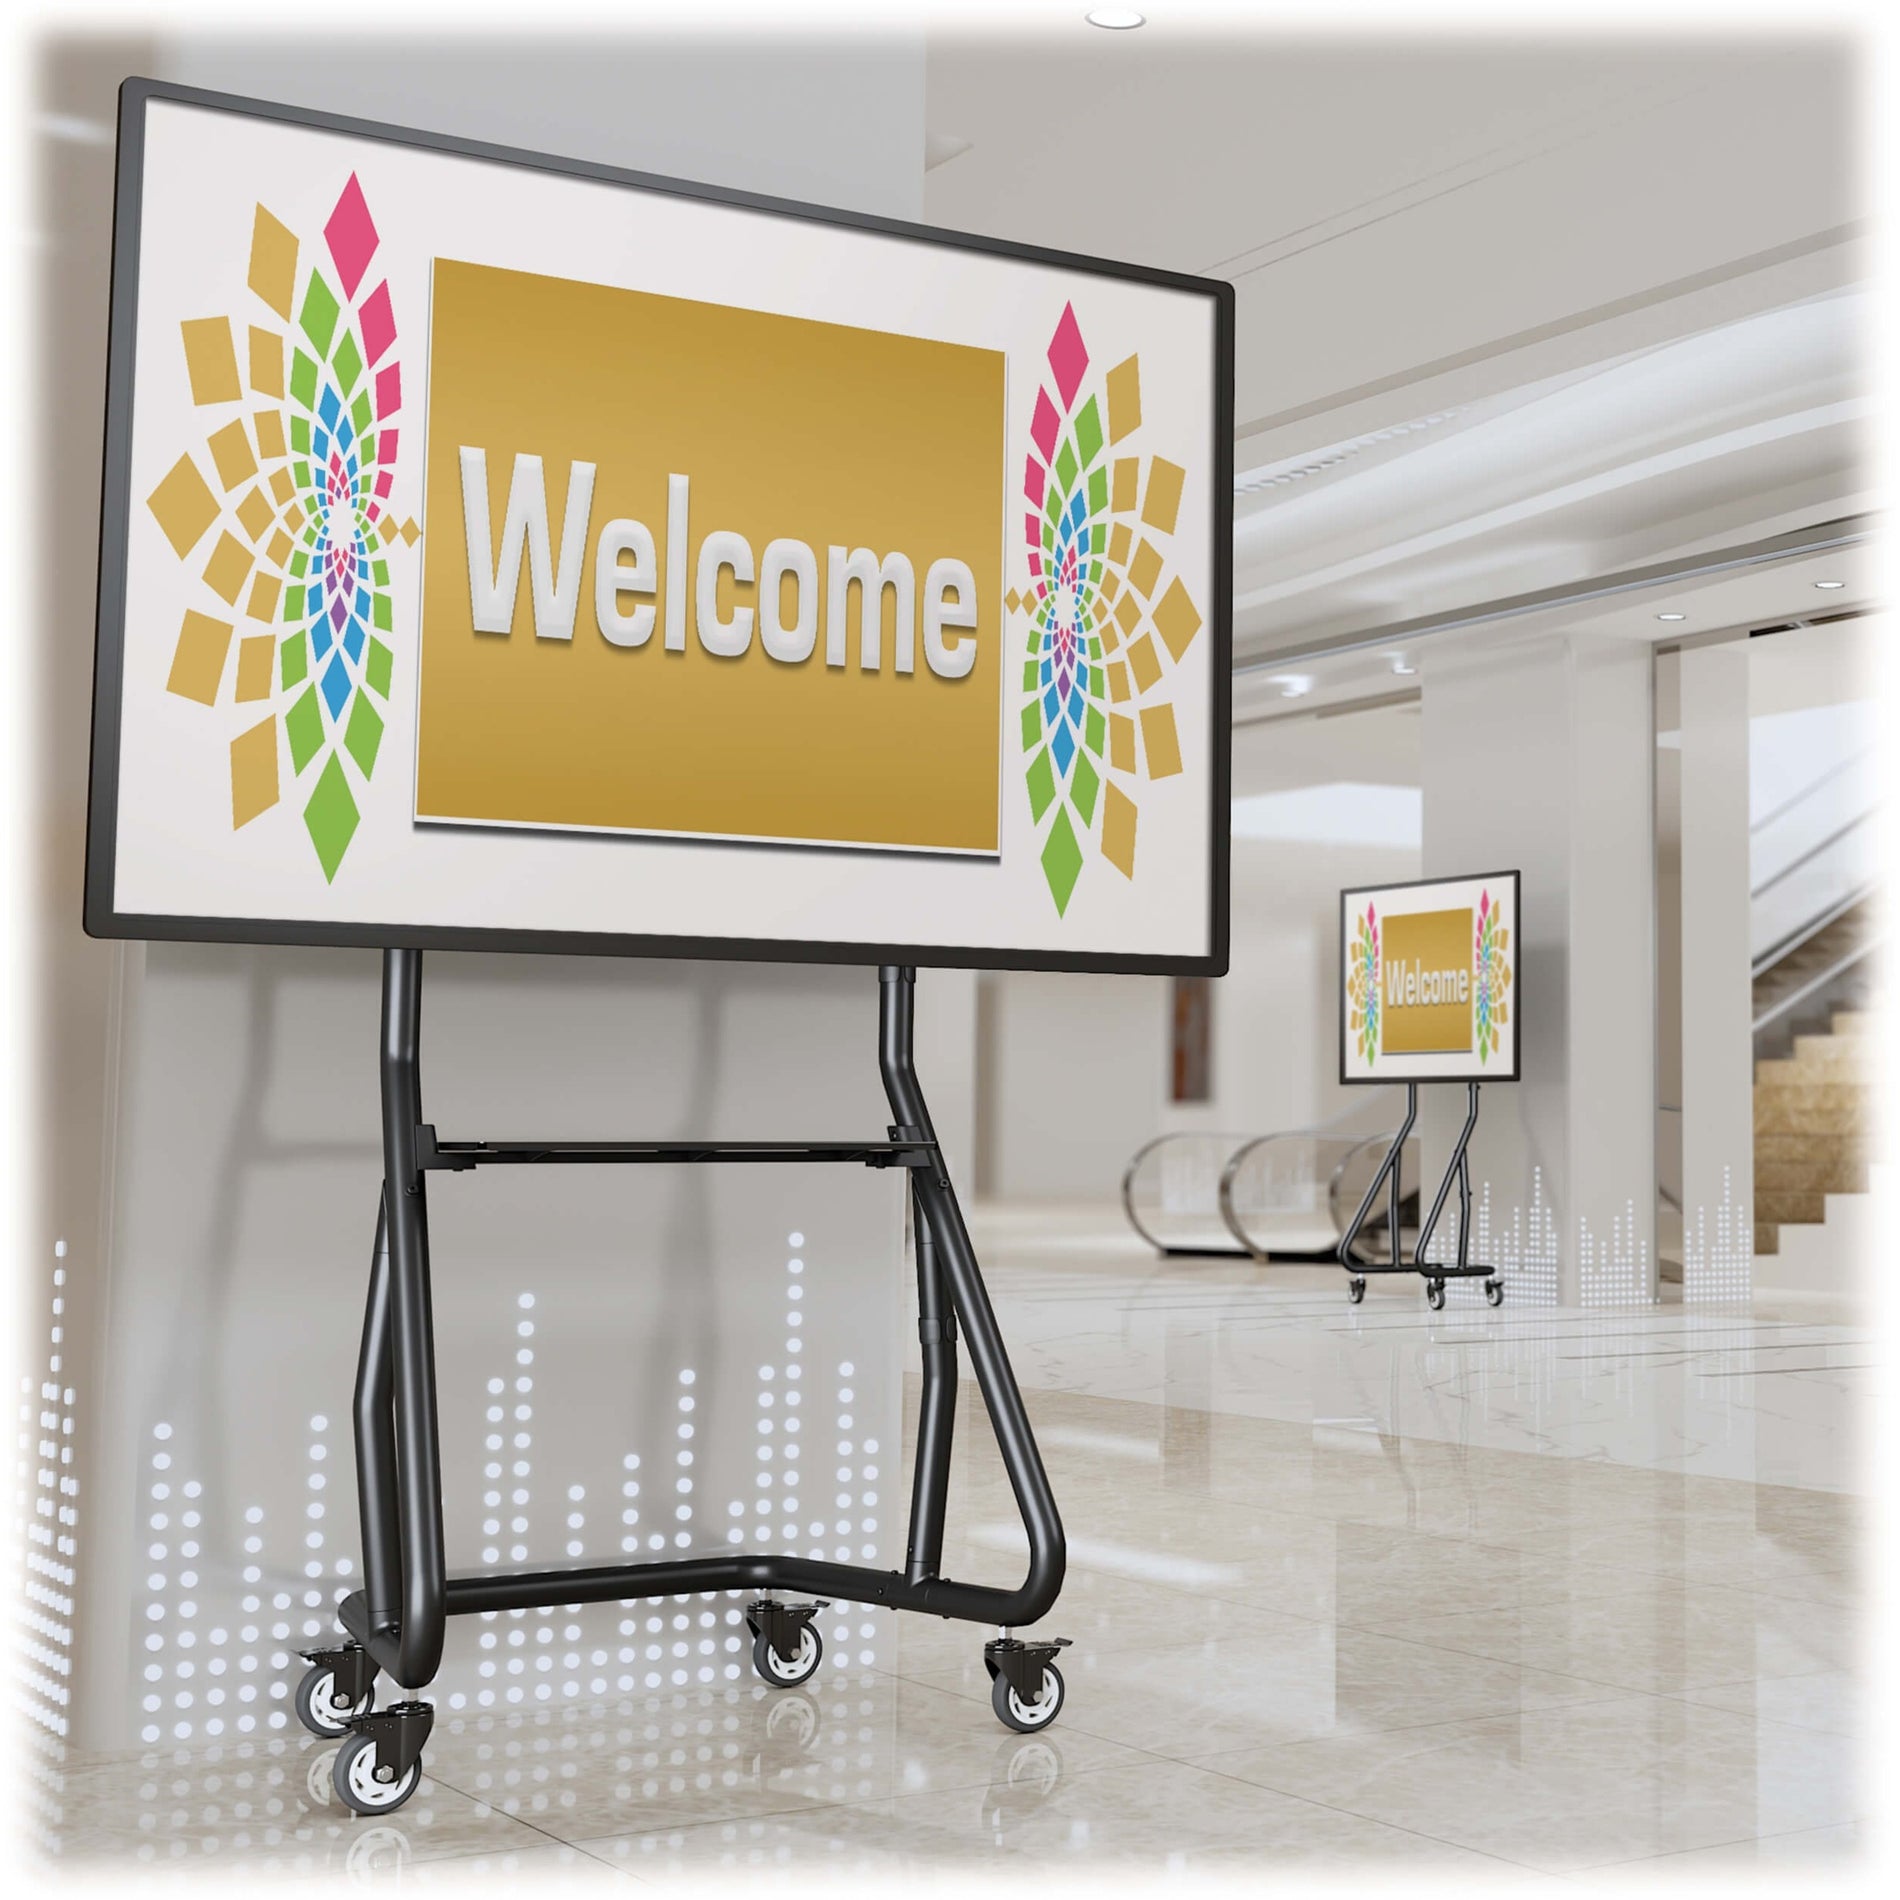 Tripp Lite DMCS3780HDS Heavy-Duty Streamline Digital Signage Stand for 37" to 80" Flat-Panel Displays, Security Lock, Adjustable Shelf, Cable Management